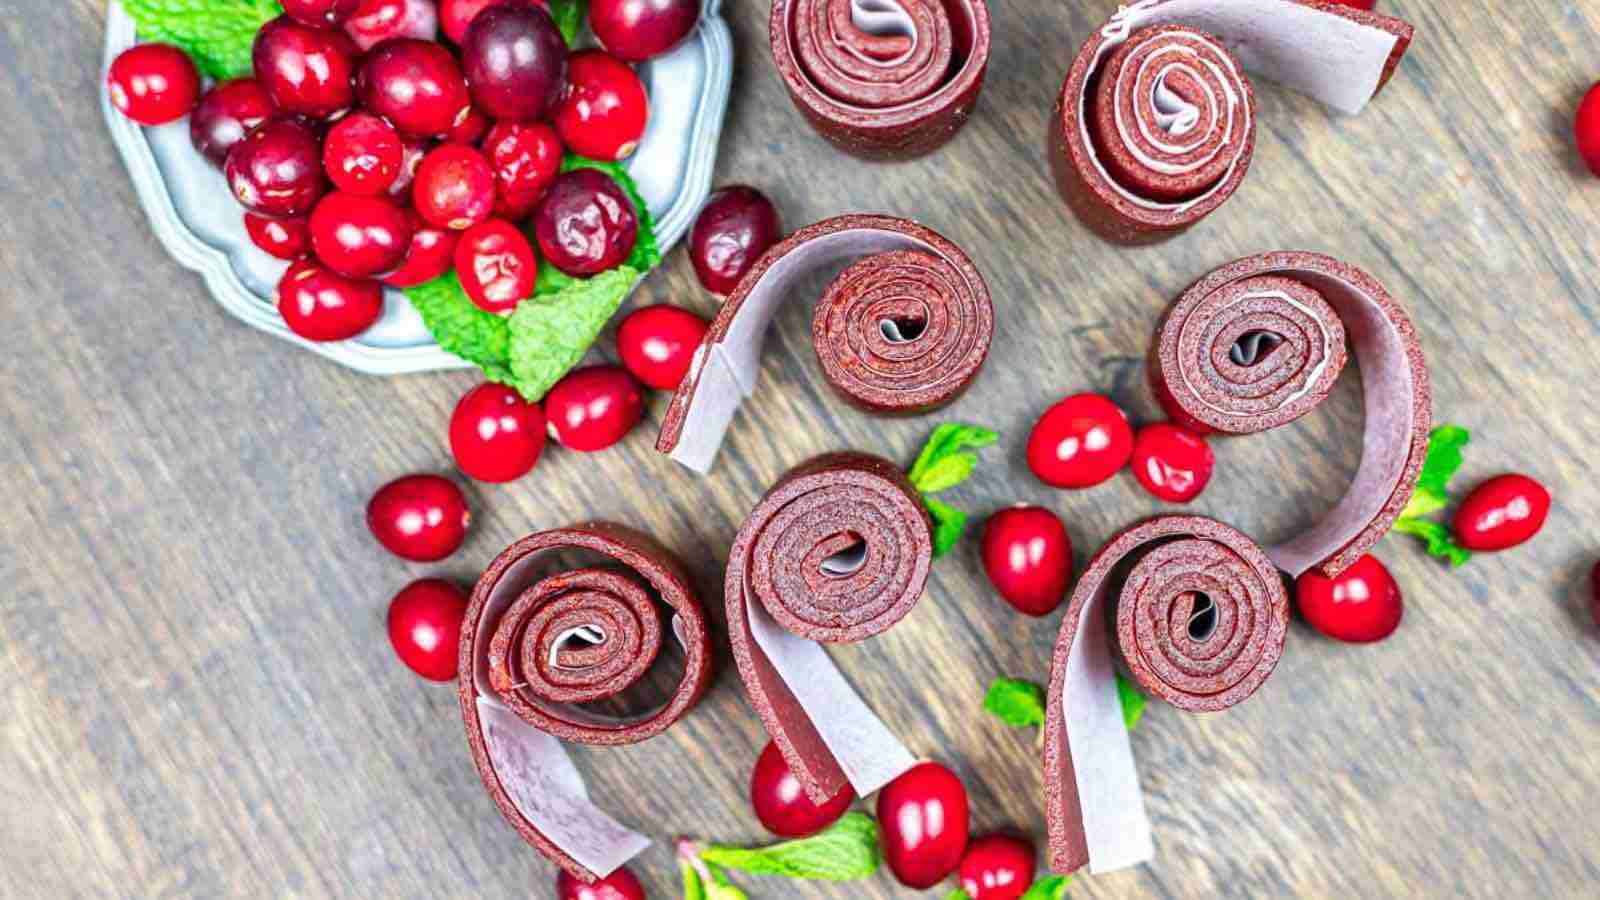 <p>Say goodbye to store-bought snacks and hello to Homemade Cranberry Fruit Roll-Ups. These fruity delights are made with real cranberries and a hint of sweetness, rolled into bite-sized treats. They’re perfect for snacking on the go or packing in lunchboxes. Whip up a batch of these tasty snacks—they’re sure to disappear fast.<br><strong>Get the Recipe: </strong><a href="https://bestcleaneating.com/cranberry-fruit-roll-ups/?utm_source=msn&utm_medium=page&utm_campaign=">Homemade Cranberry Fruit Roll-Ups</a></p>